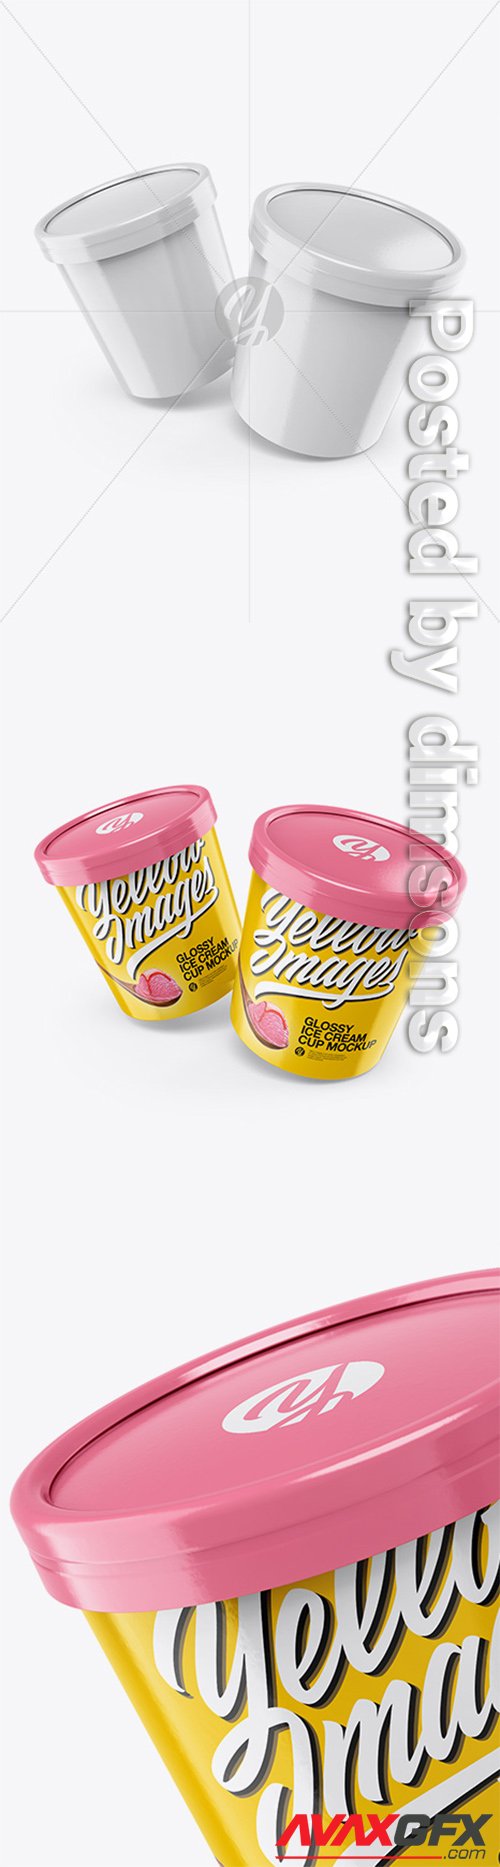 Two Glossy Ice Cream Cups Mockup 34190